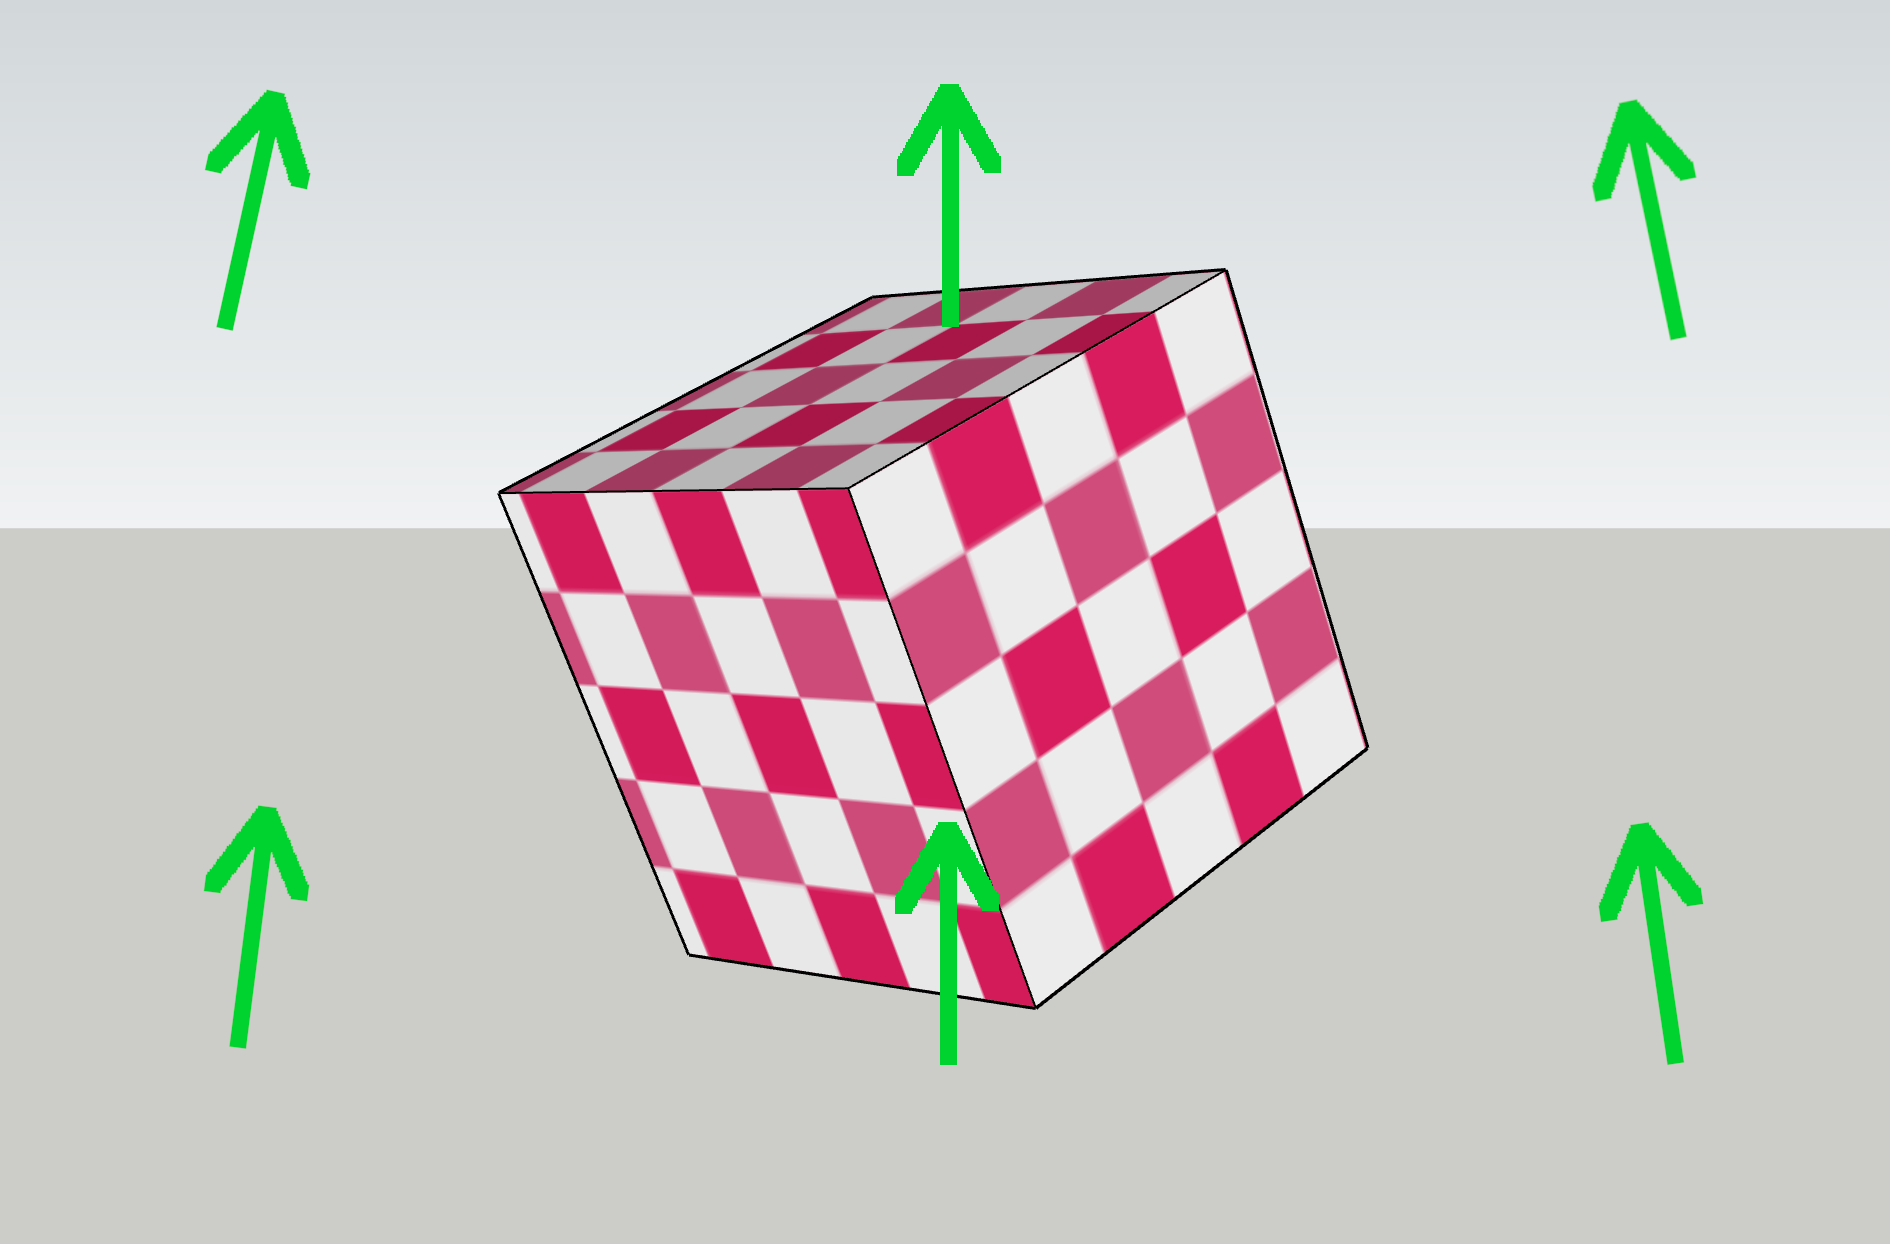 A diagram of a cube, with green arrows pointing up in world space